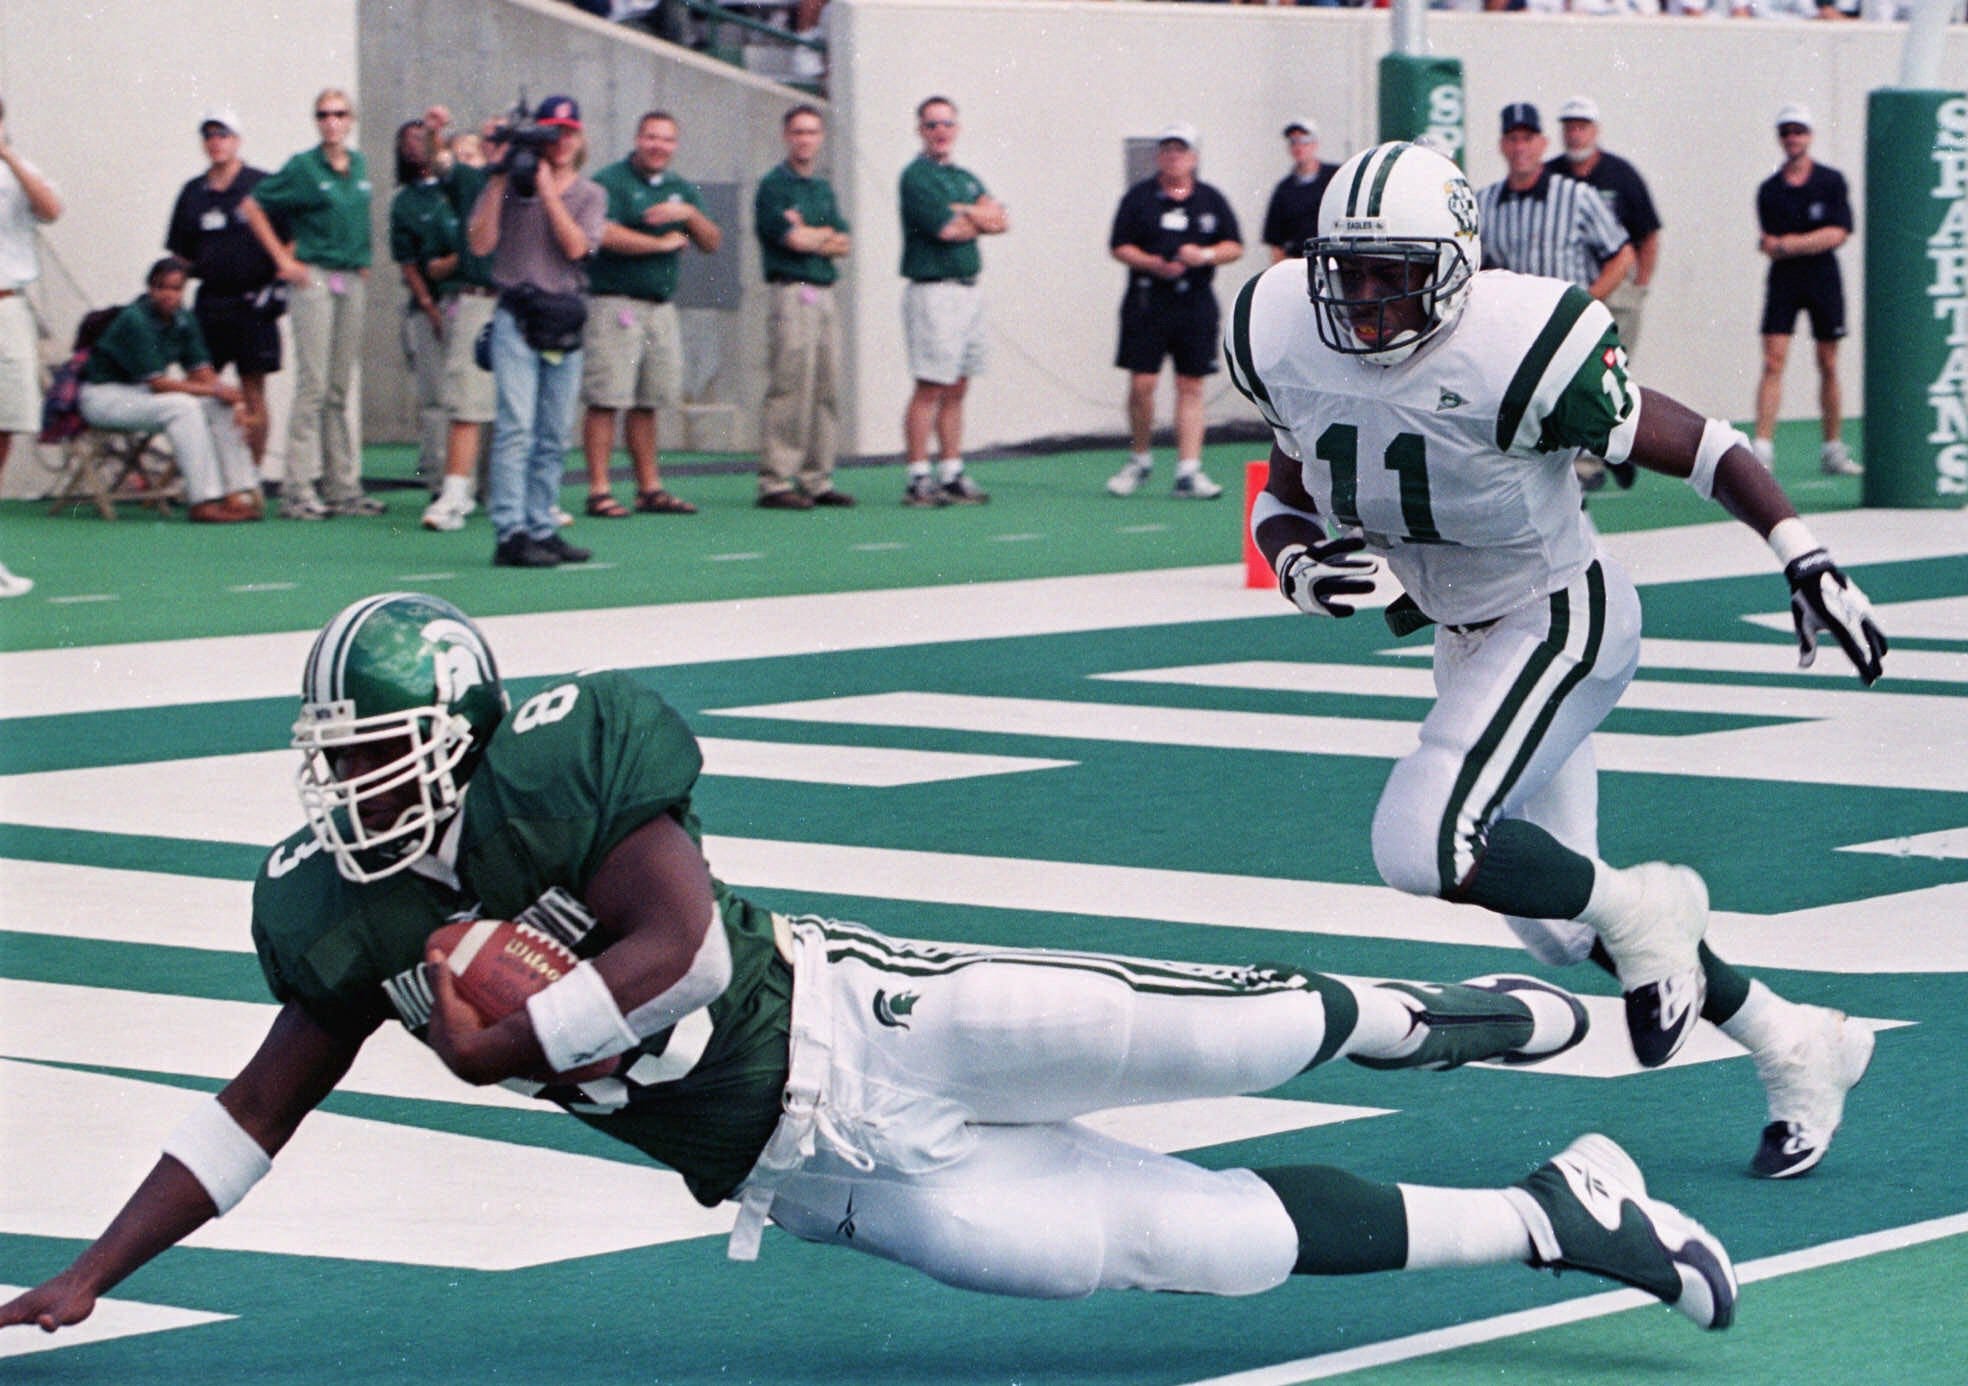 TIGHT END – Chris Baker, 1998-2001: With 133 receptions, Baker has the most catches by a tight end in program history and ranks in the top 10 overall. A two-time second-team All-Big Ten player, Baker had 1,705 career receiving yards with 18 touchdown while catching 40 passes for 548 yards and four touchdowns as a senior in 2001.